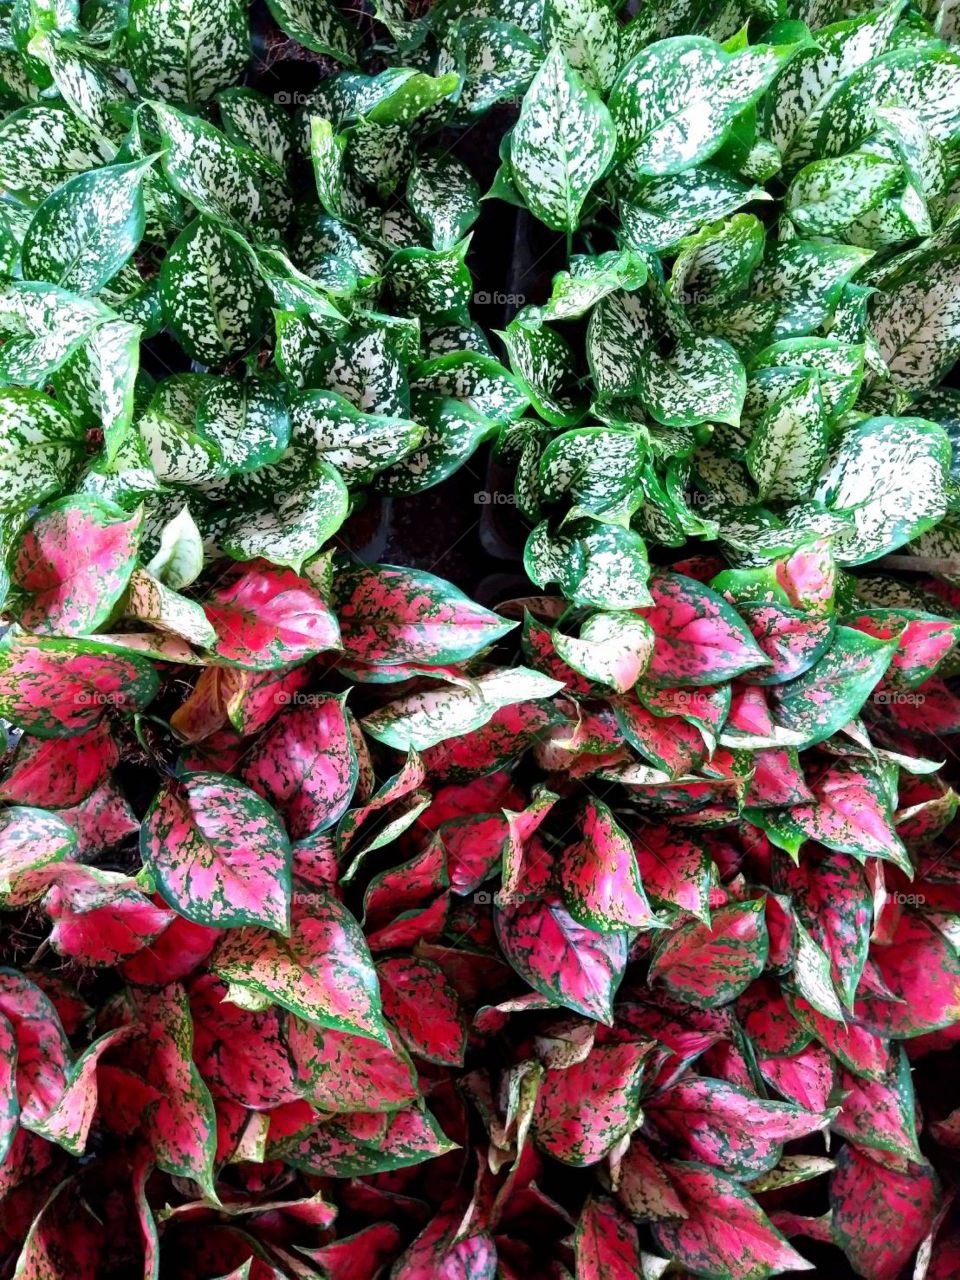 Green and Red Golden pothos plants.